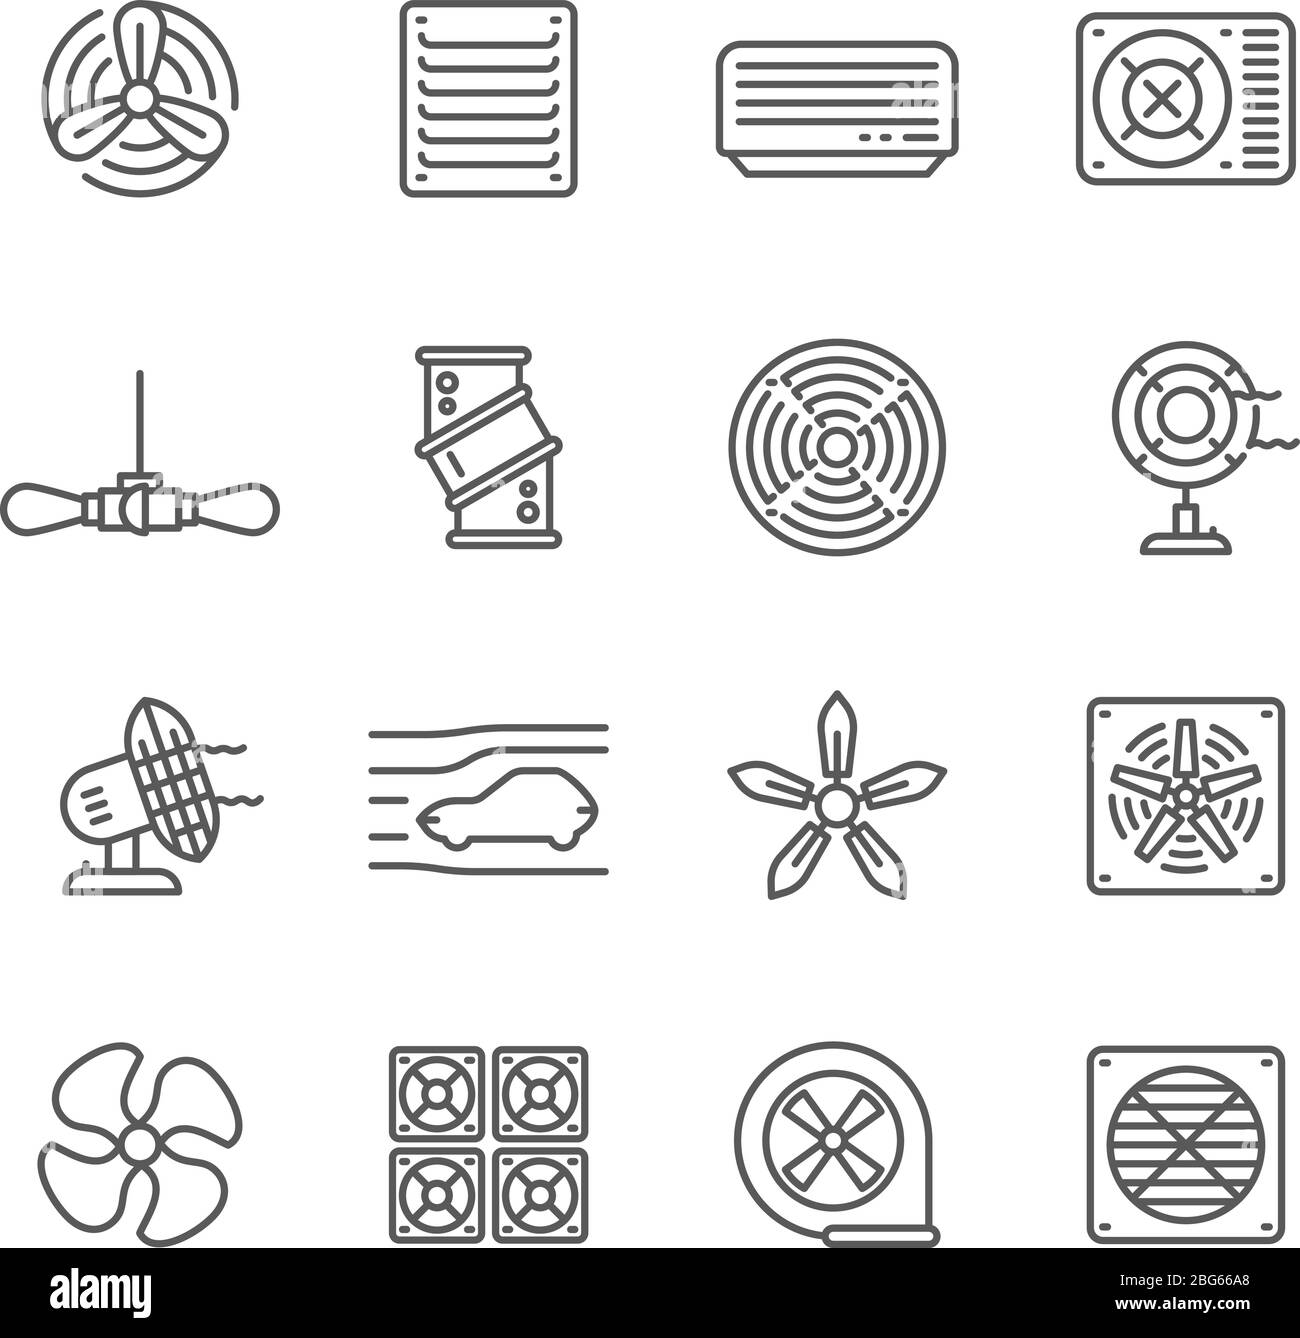 Heating and cooling airflow pictograms. Ventilation, airing filter, fan, blower, aerodynamics, turbine air vector icons. Illustration of airflow venti Stock Vector